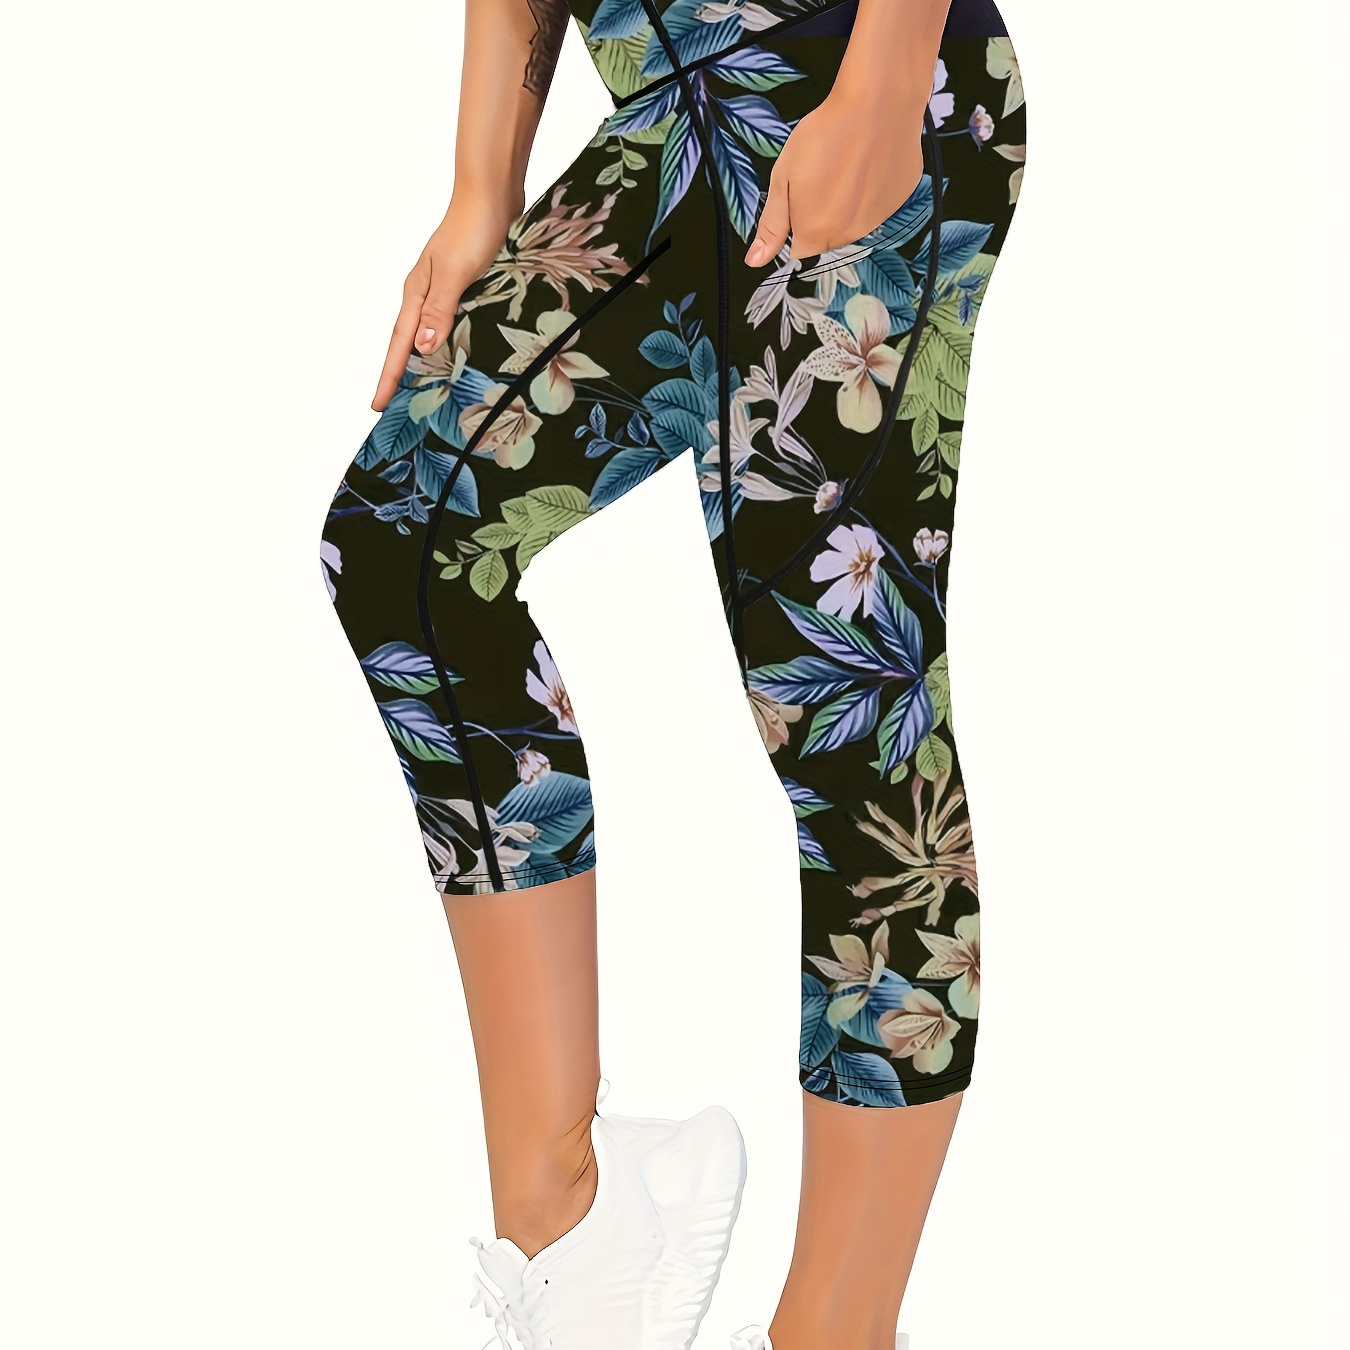 

Women's High Waist Yoga Cropped Pants With Pockets, Tummy Control Workout Leggings, Floral Print Stretchy Sports Tights, Fitness & Gym Wear